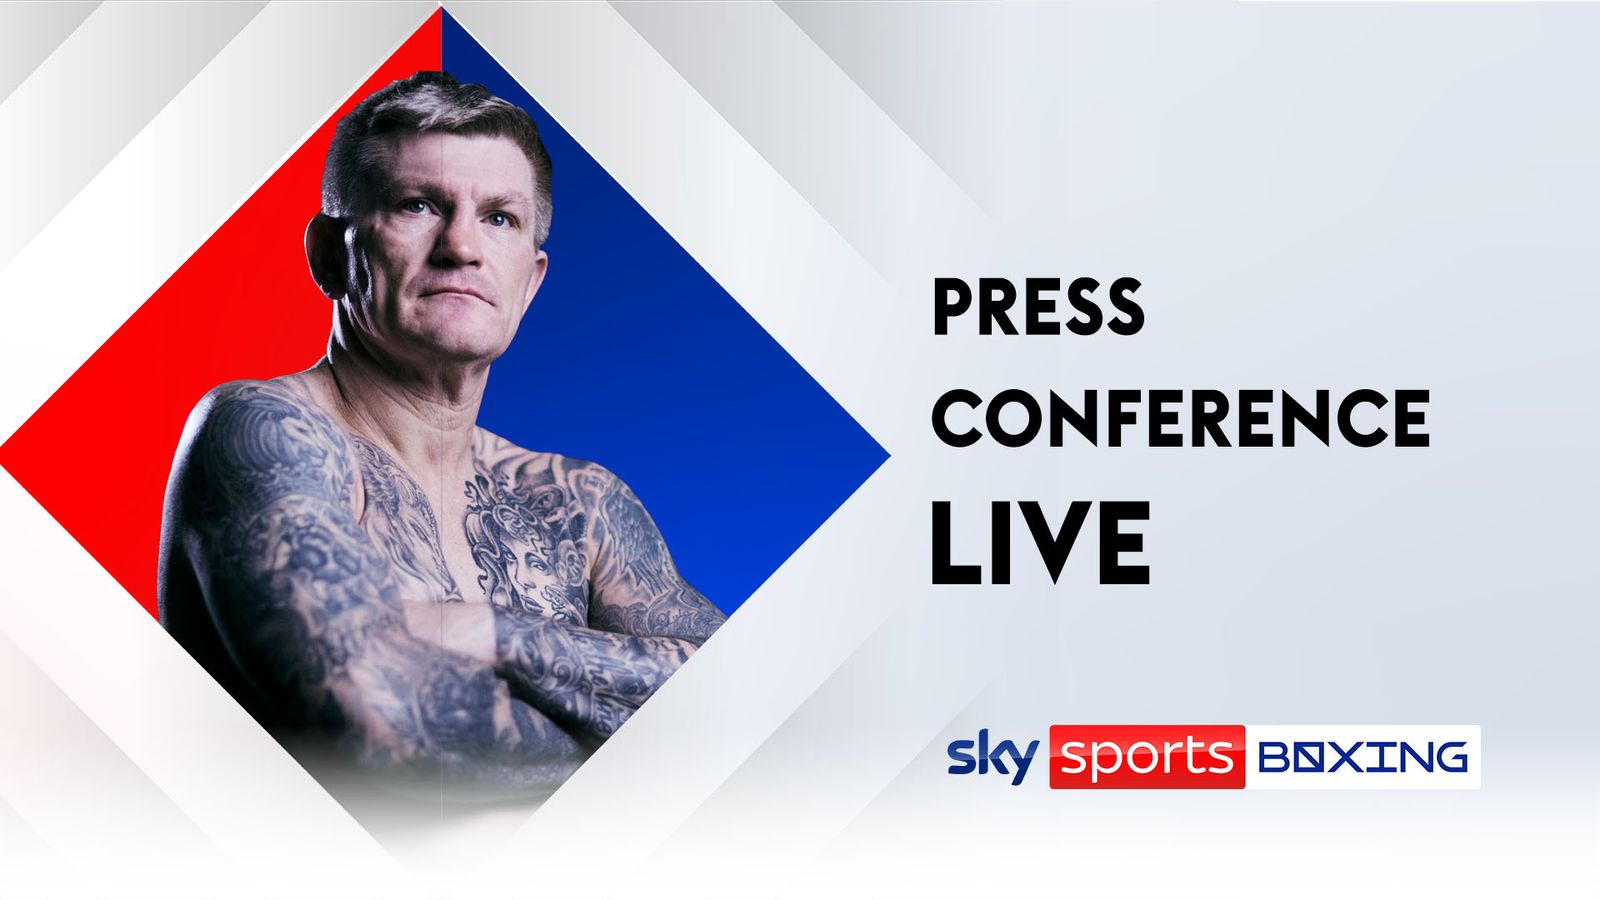 Ricky Hatton vs Marco Antonio Barrera Watch live stream of final press conference ahead of Manchester exhibition Boxing News Sky Sports